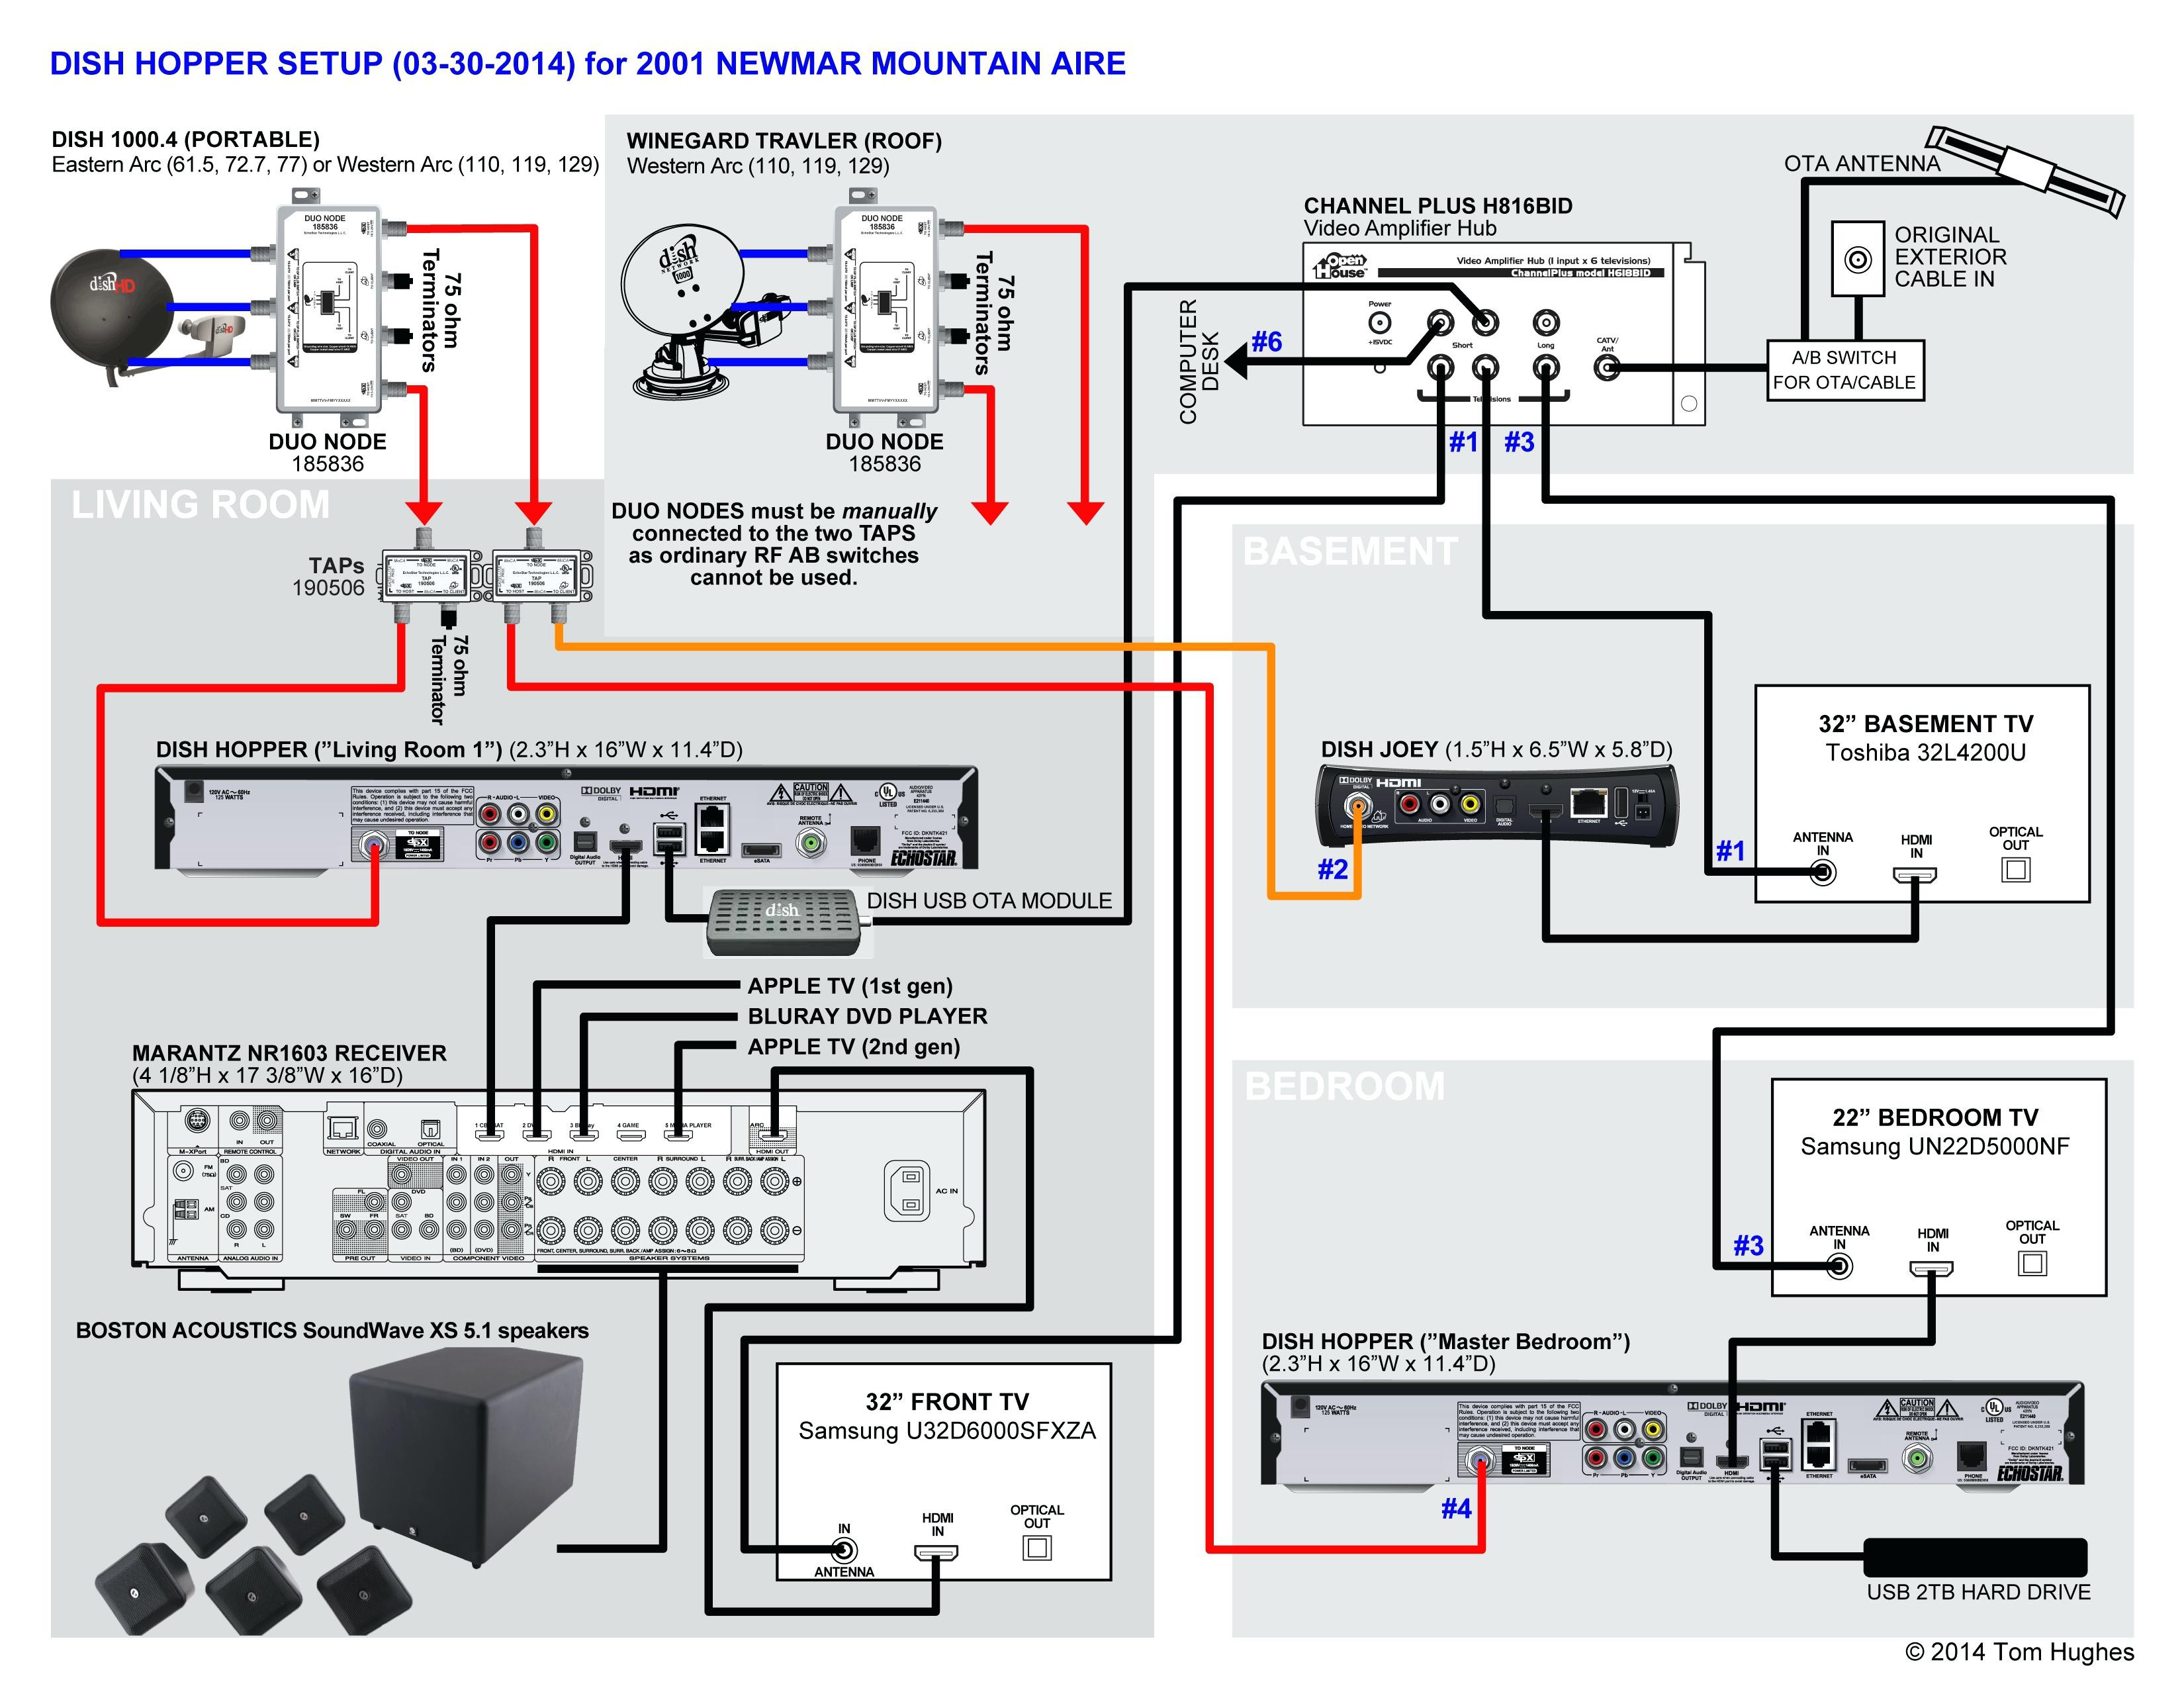 Hopper 3 Wiring Diagram Copy Satellite Tv House Wiring Diagram How to Install Dish Network